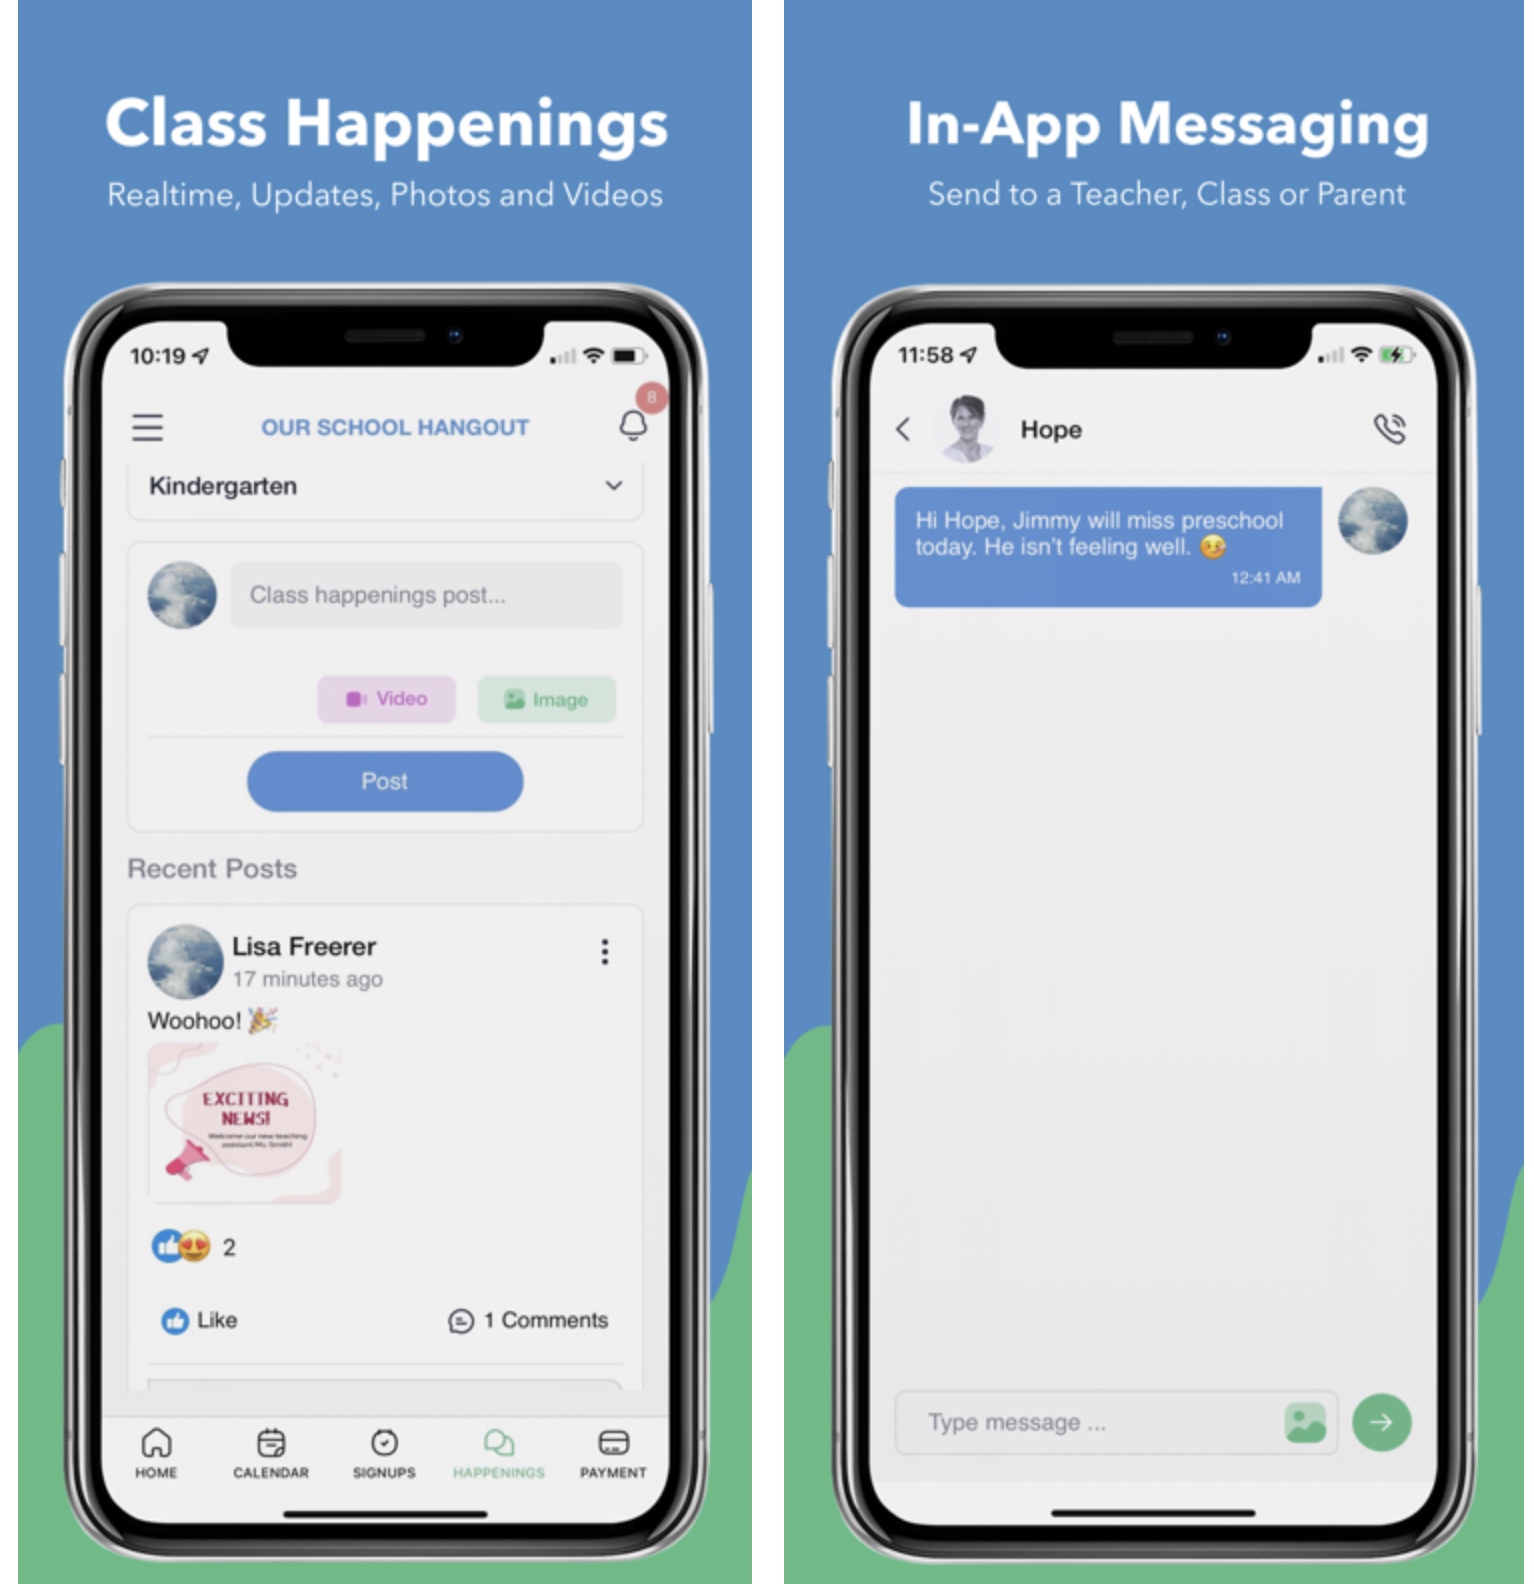 The app enhances interaction with integrated messaging and a 'Class Happenings' section for teachers to share updates, photos, and videos, fostering easy communication and parent engagement.